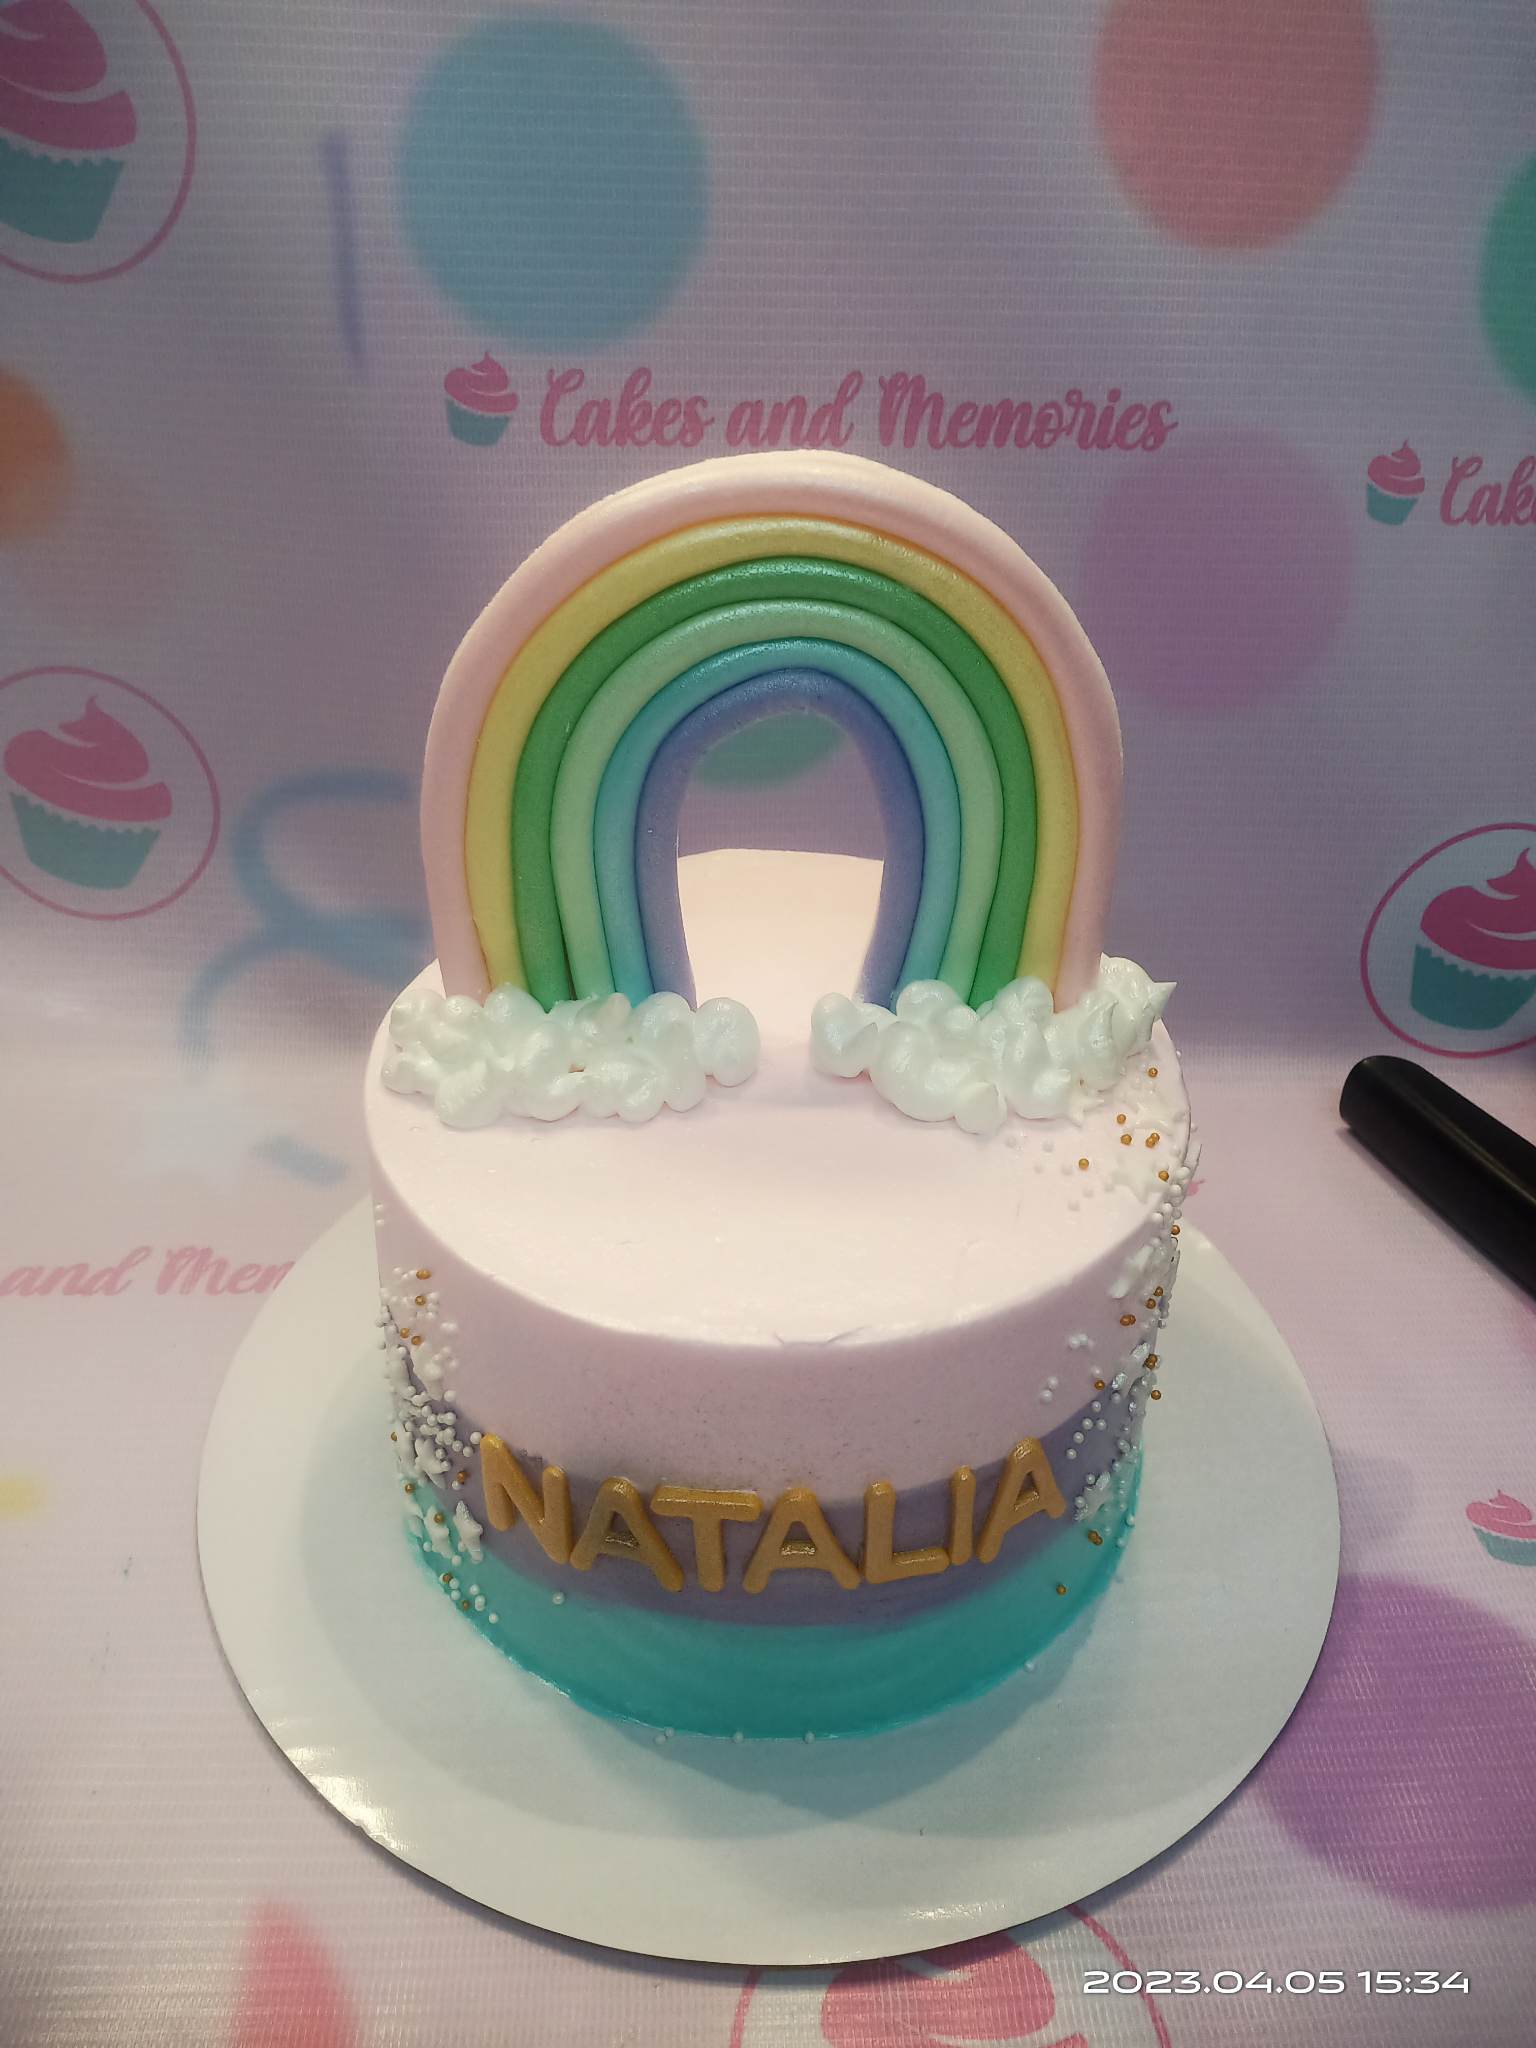 This custom decorated cake features a vivid rainbow pattern, comprised of various colors from pink, purple, blue, and more. It is perfect for celebrating a birthday, as it is full of rich colors and clouds that are sure to make your special day even more special. Its vibrant colors and unique design ensure a high-quality cake that will make any occasion memorable.